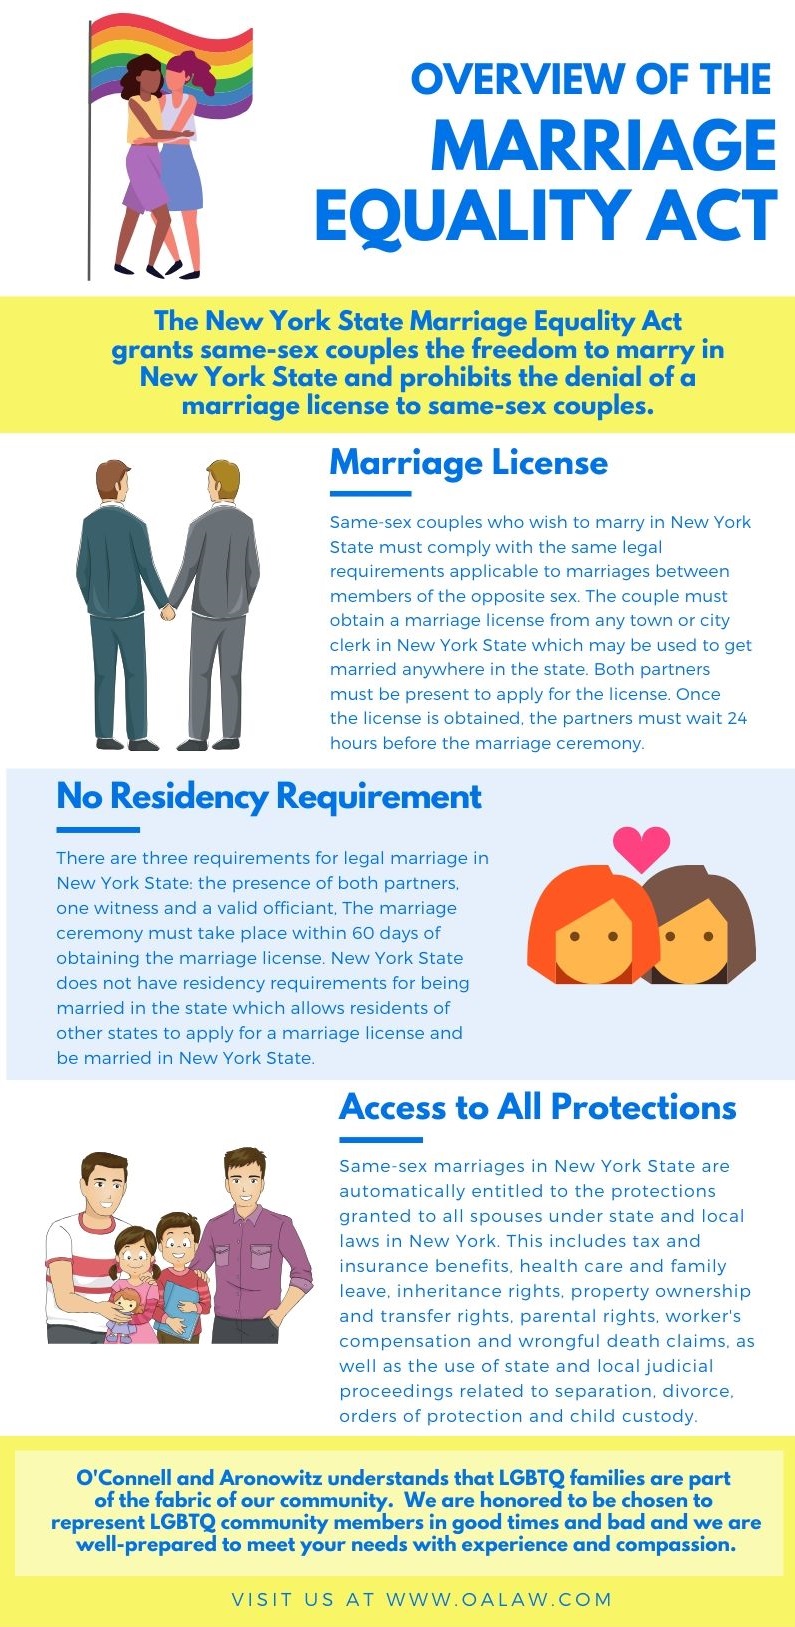 Overview of the Marriage Equality